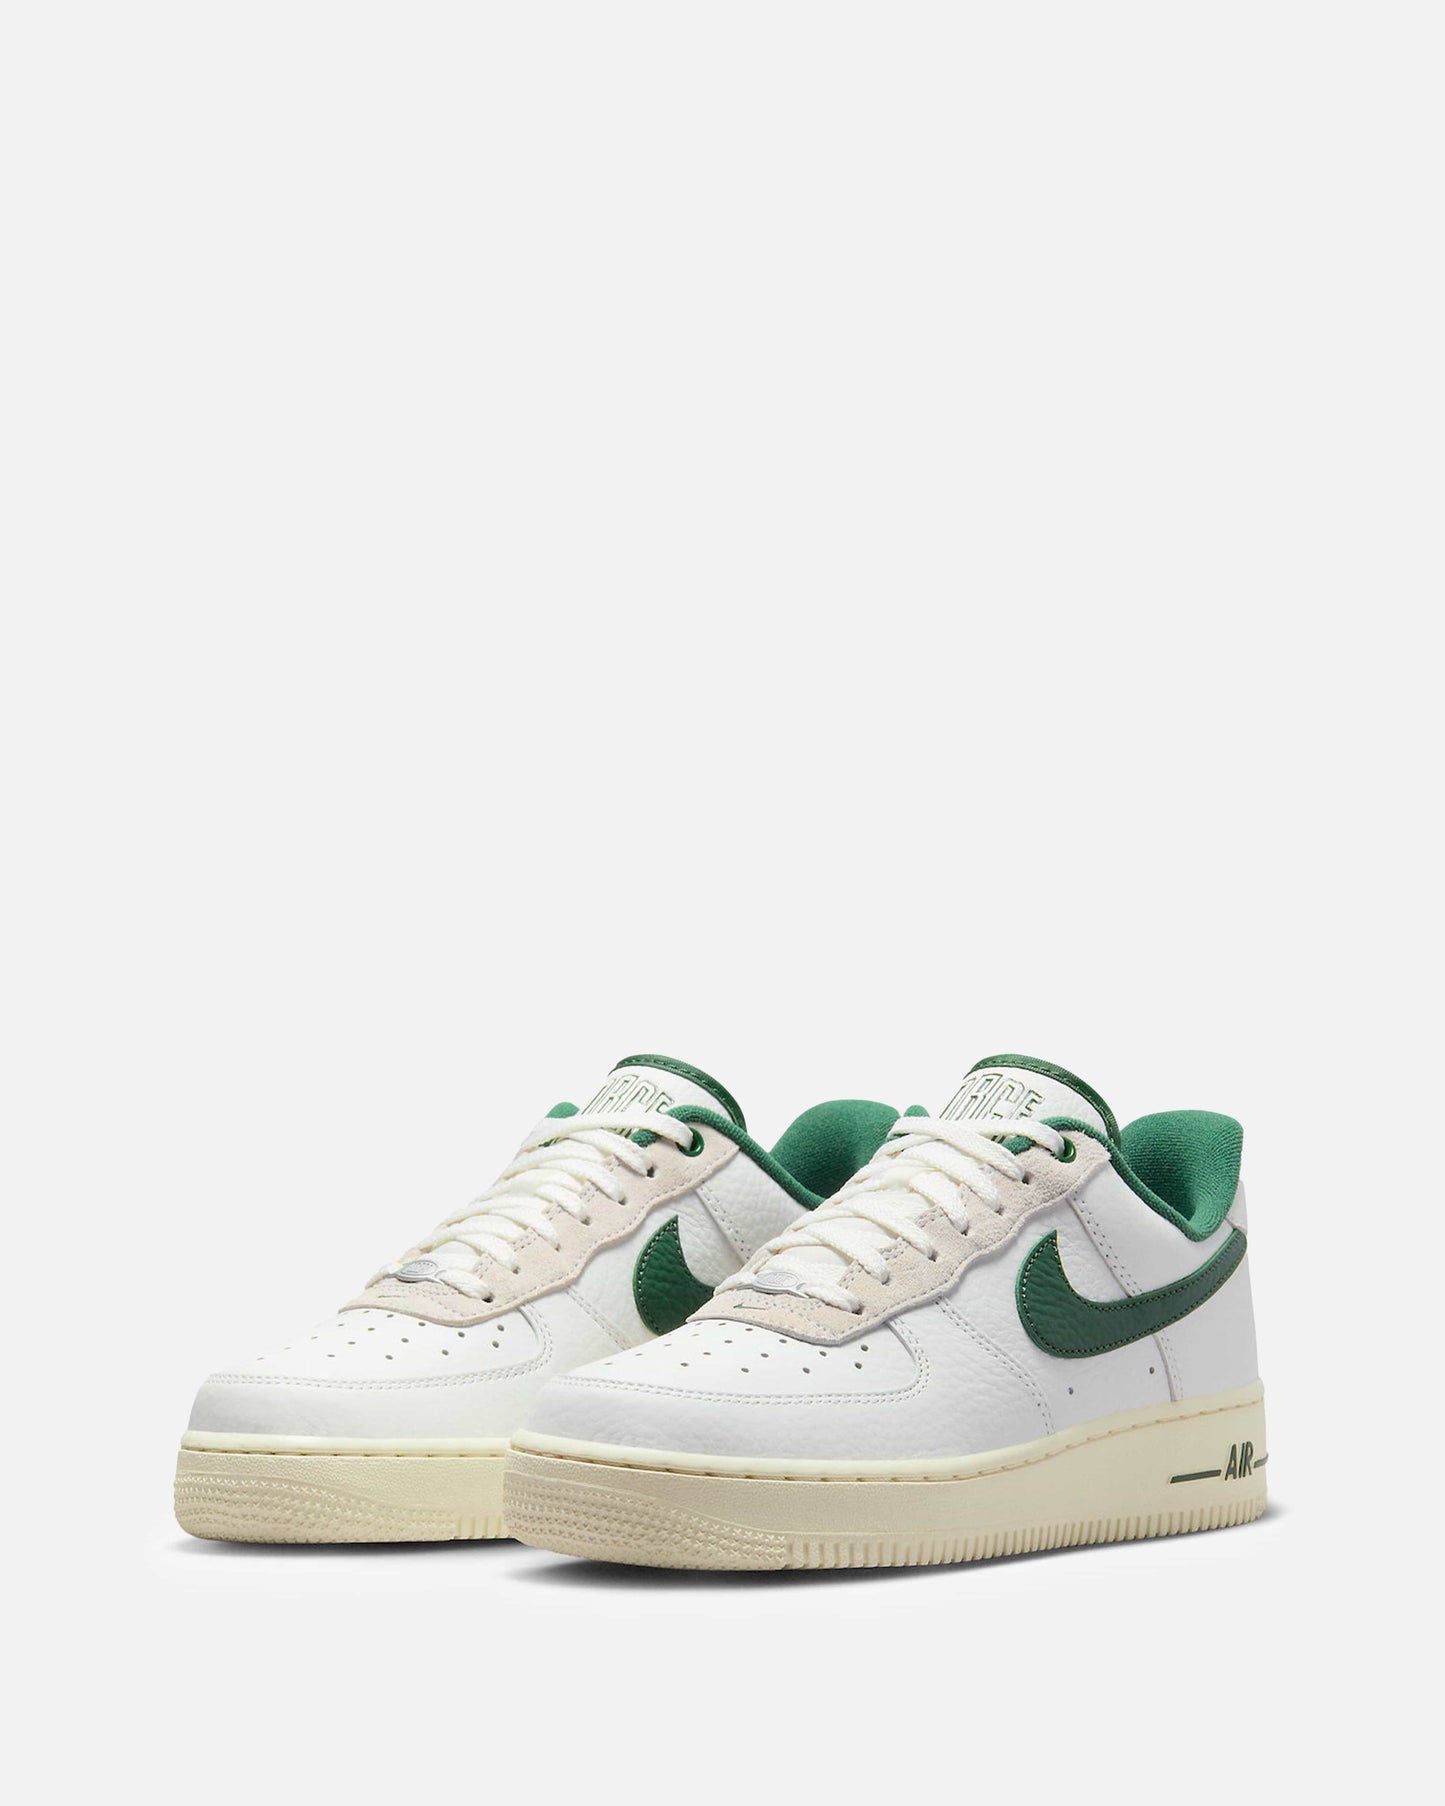 Nike Women's Shoes Air Force 1 '07 LX 'Summit White/Gorge Green'